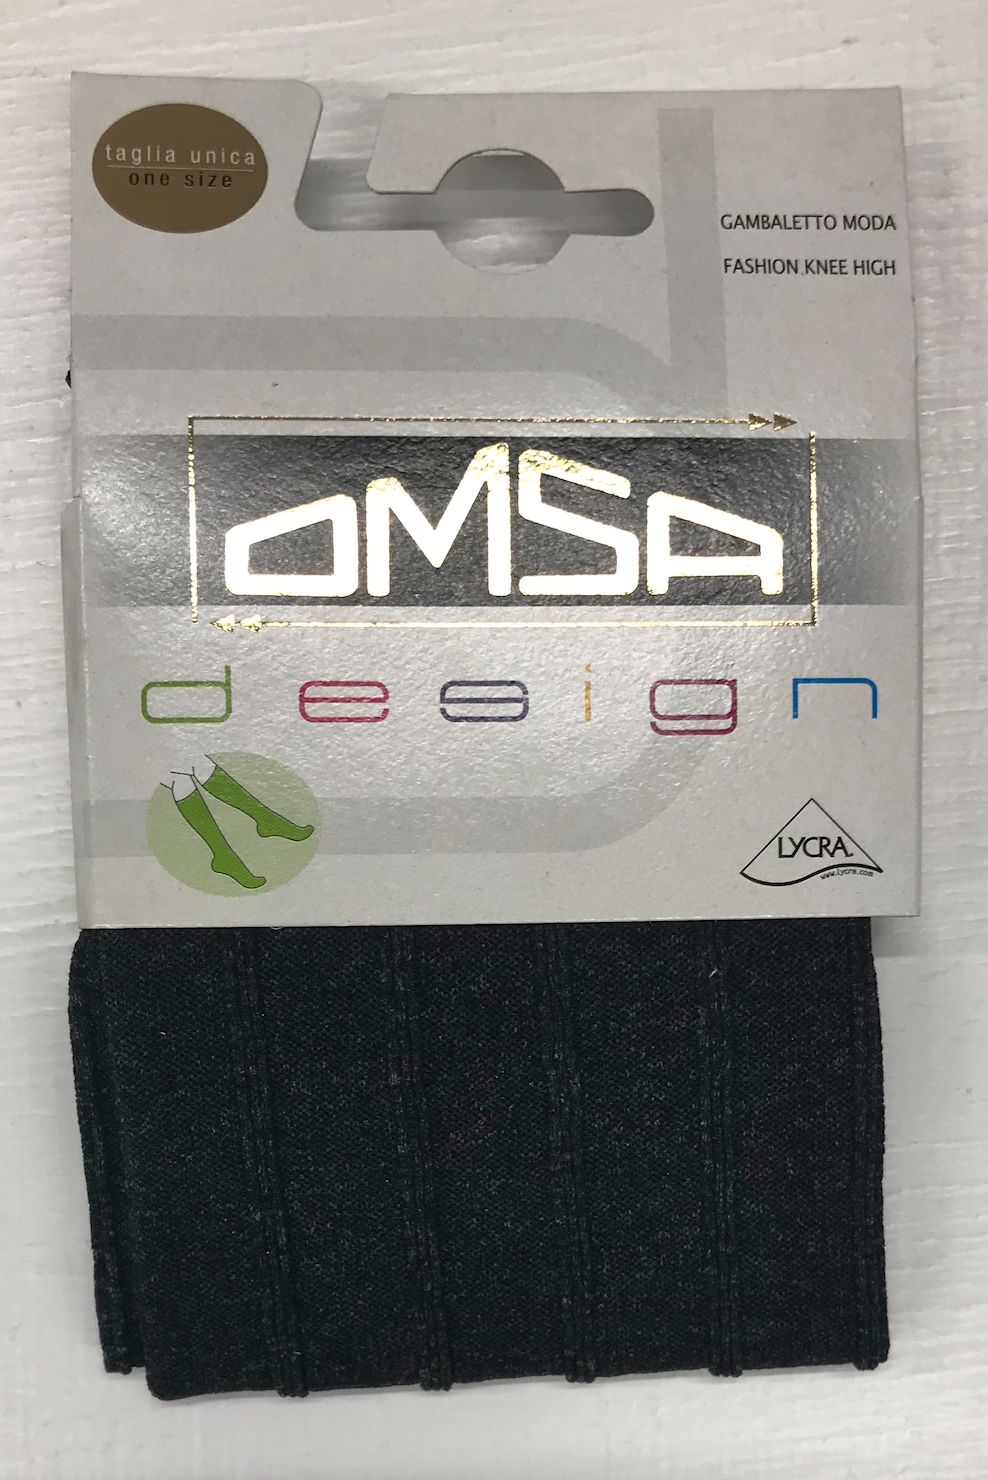 Omsa Oxford Gambaletto - Ultra opaque dark grey flecked ribbed fashion knee-high sock with an elasticated comfort cuff with scalloped edge.